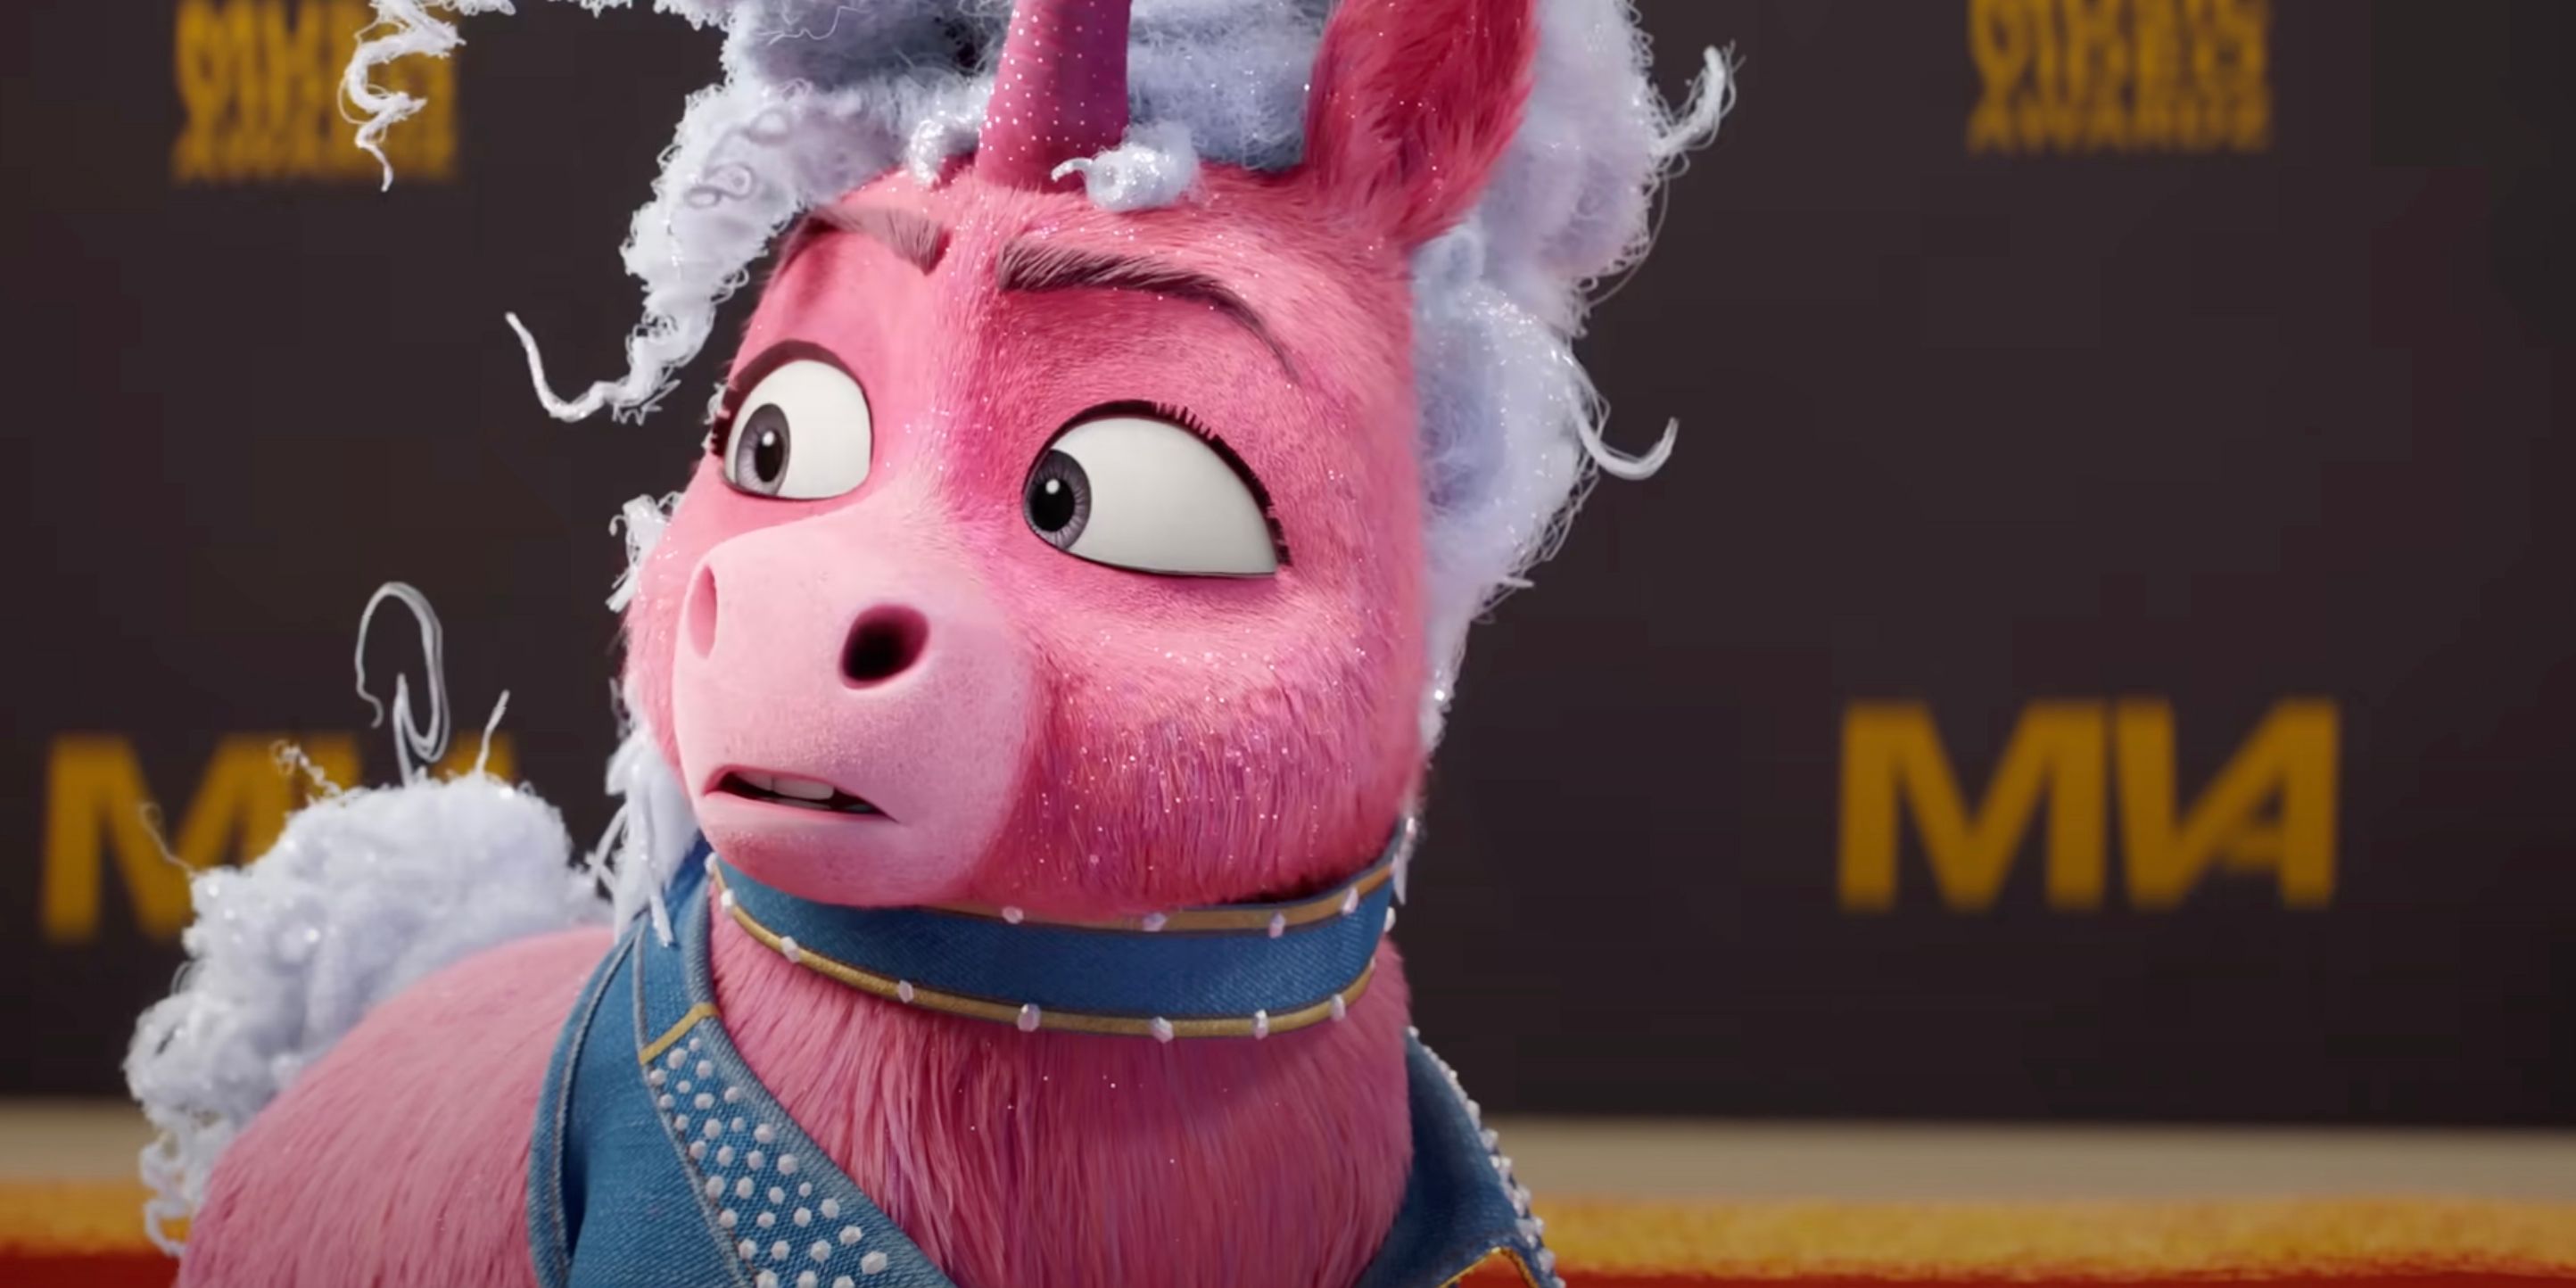 Thelma The Unicorn Directors Jared Hess & Lynn Wang On The Film's Theme Of Self-Acceptance